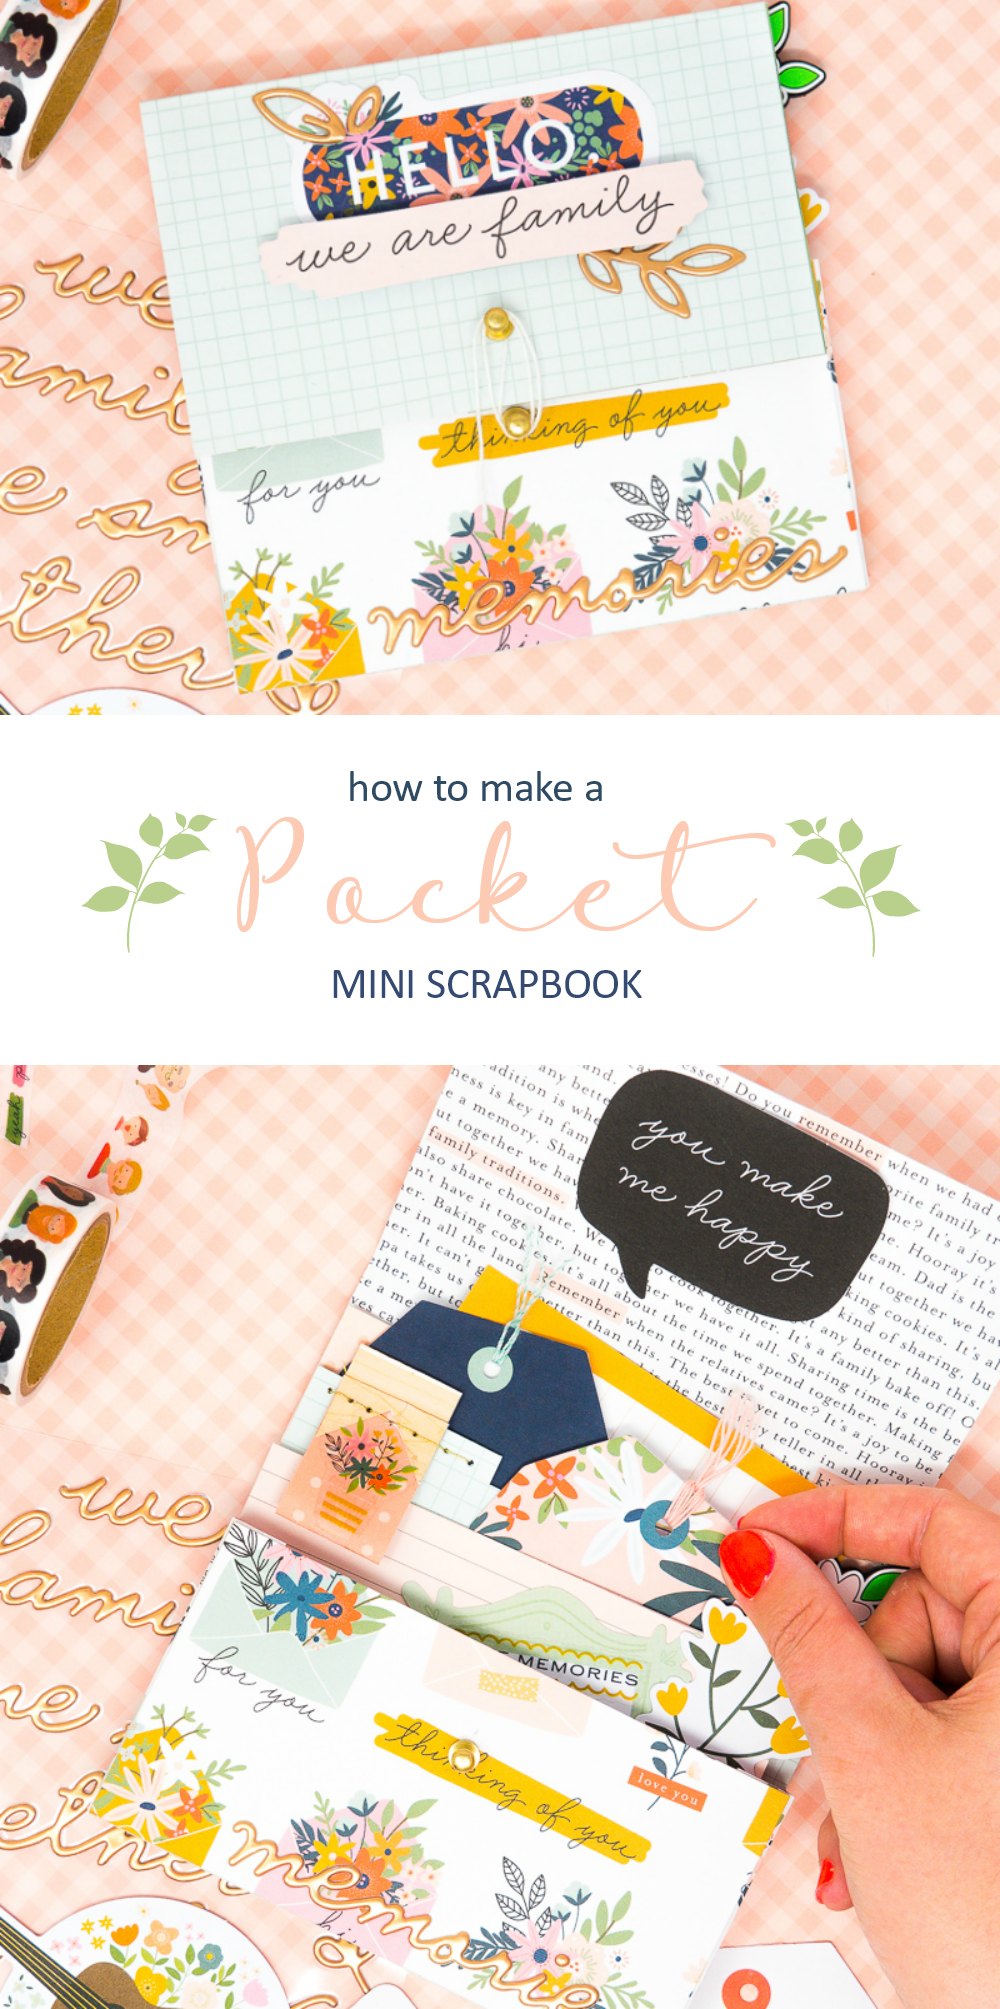 DIY Pocket Mini Scrapbook. Keep your memories close at hand with a handy little scrapbook that has pockets and fits in your purse! 